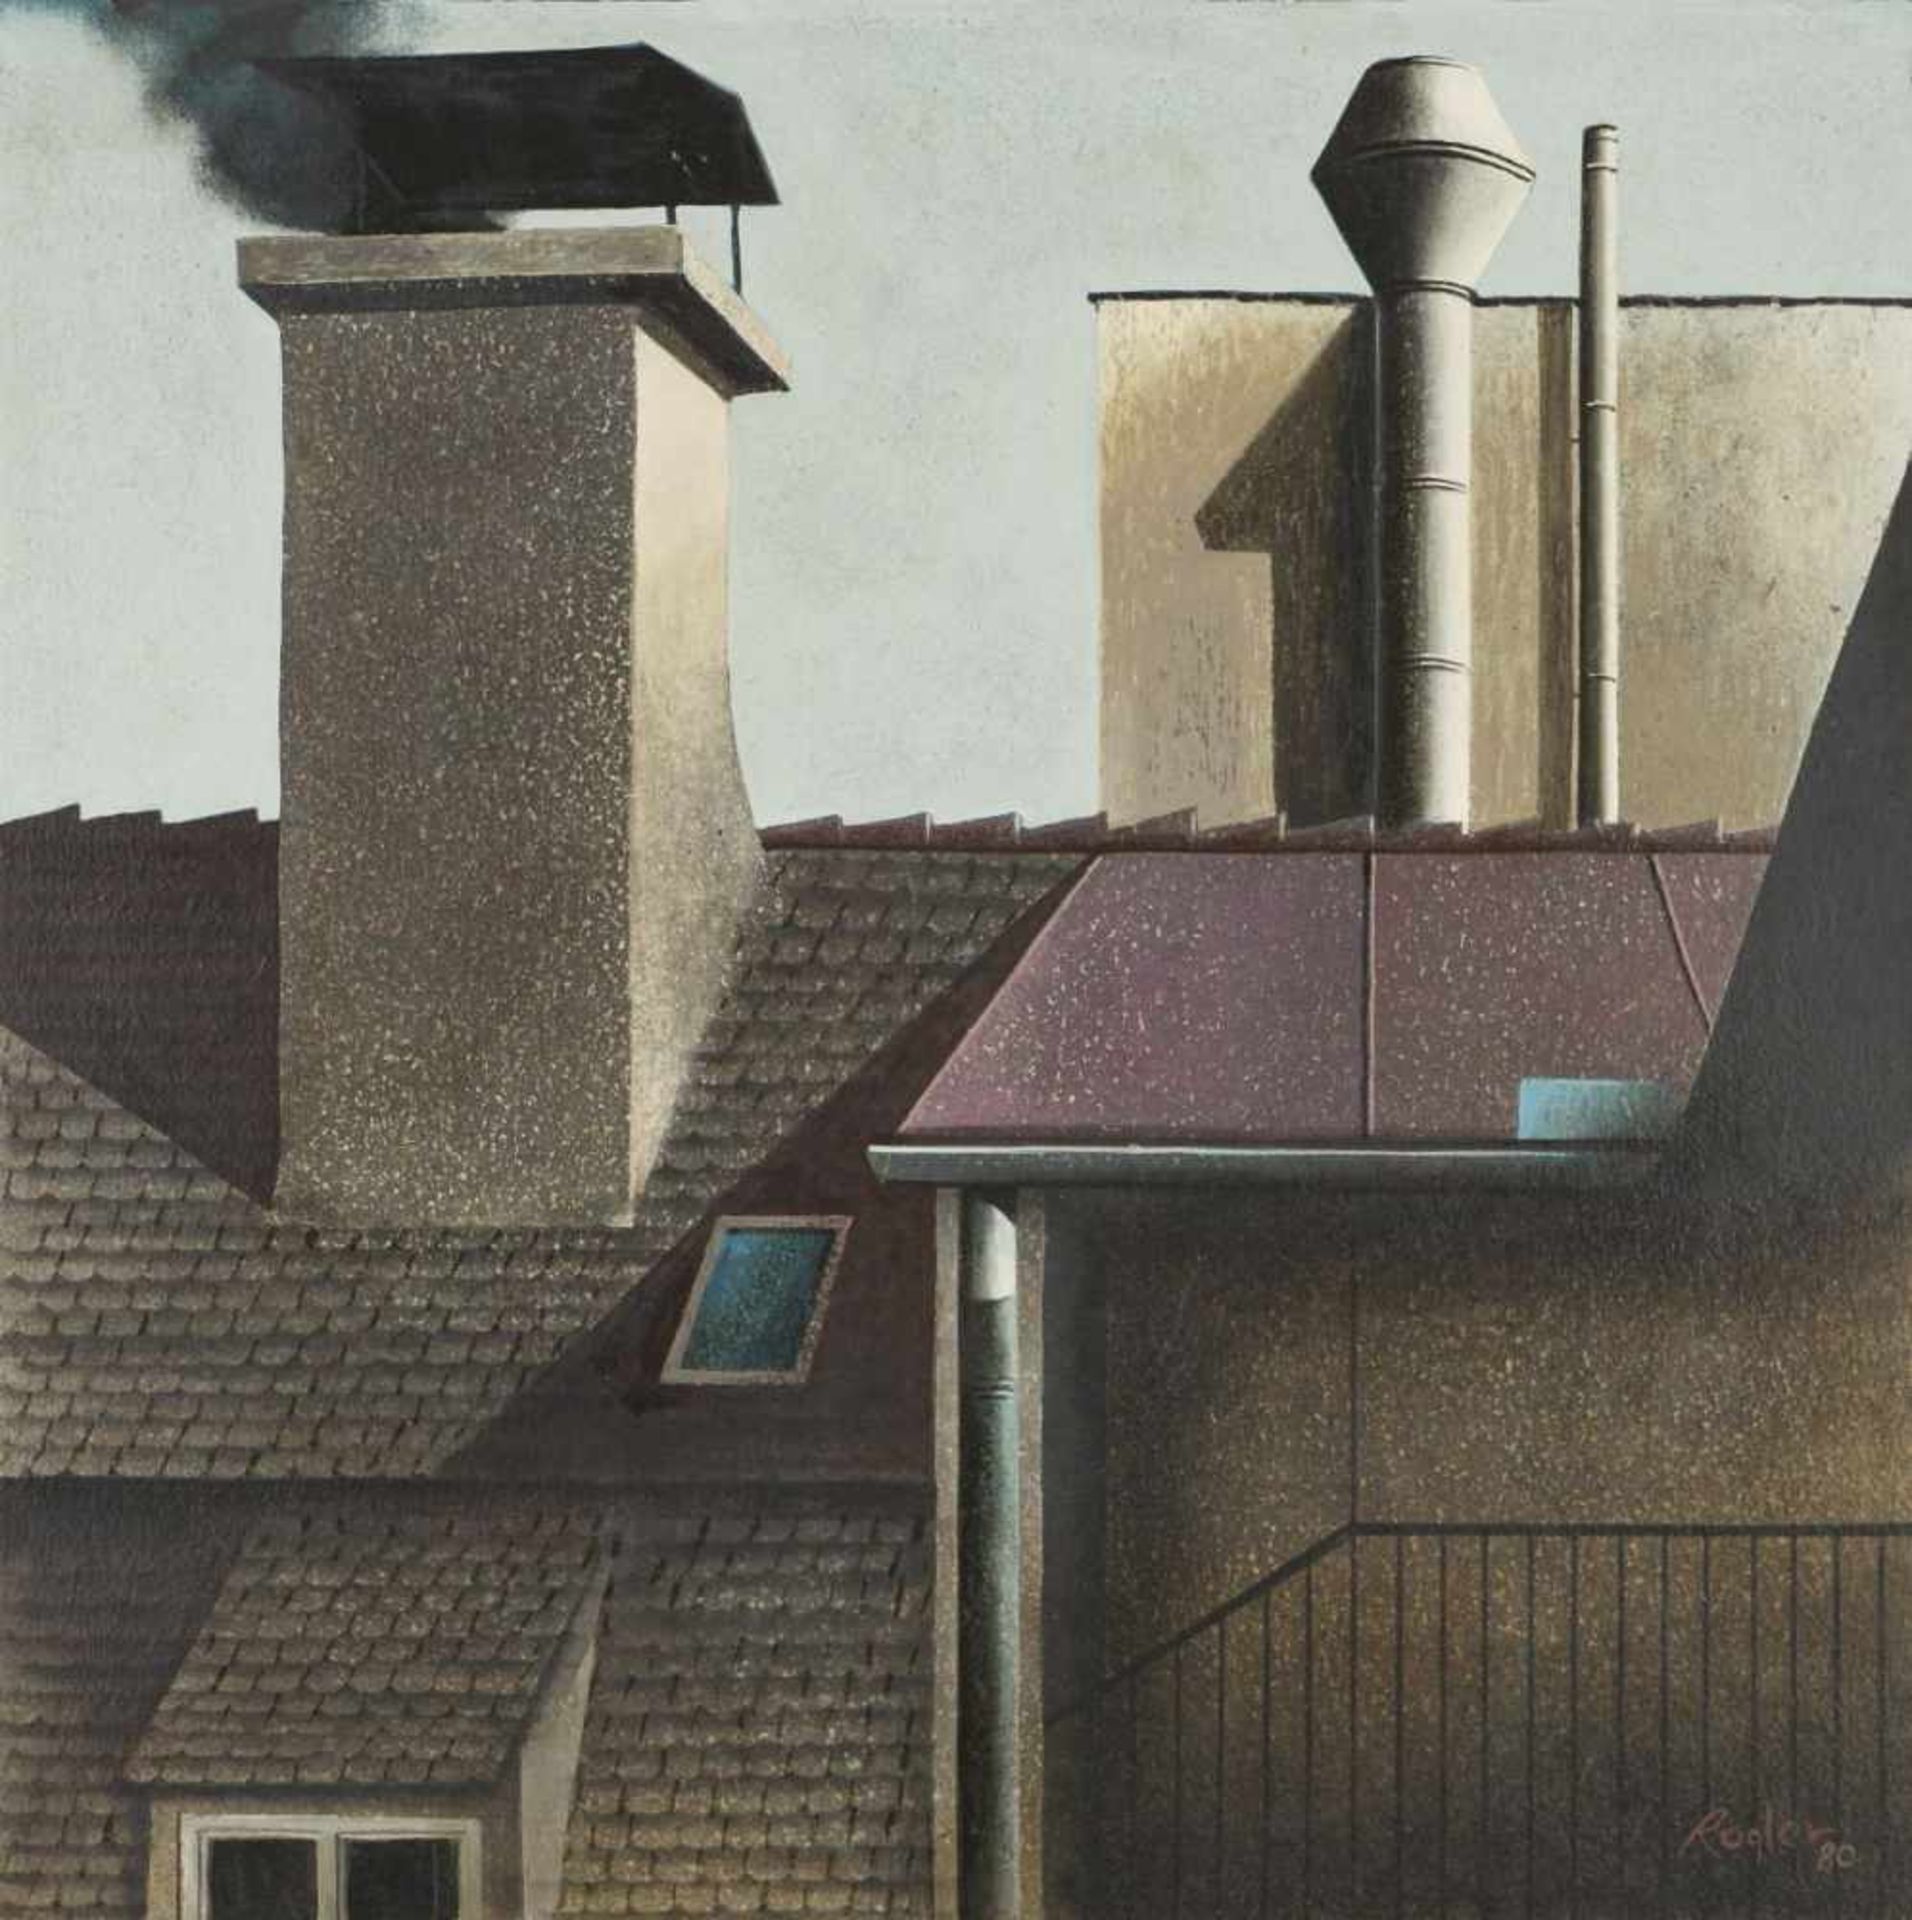 Rogler, FranzRoofs, 1980Mixed Technique on Cardboardsigned and dated lower right19,7 x 19,7